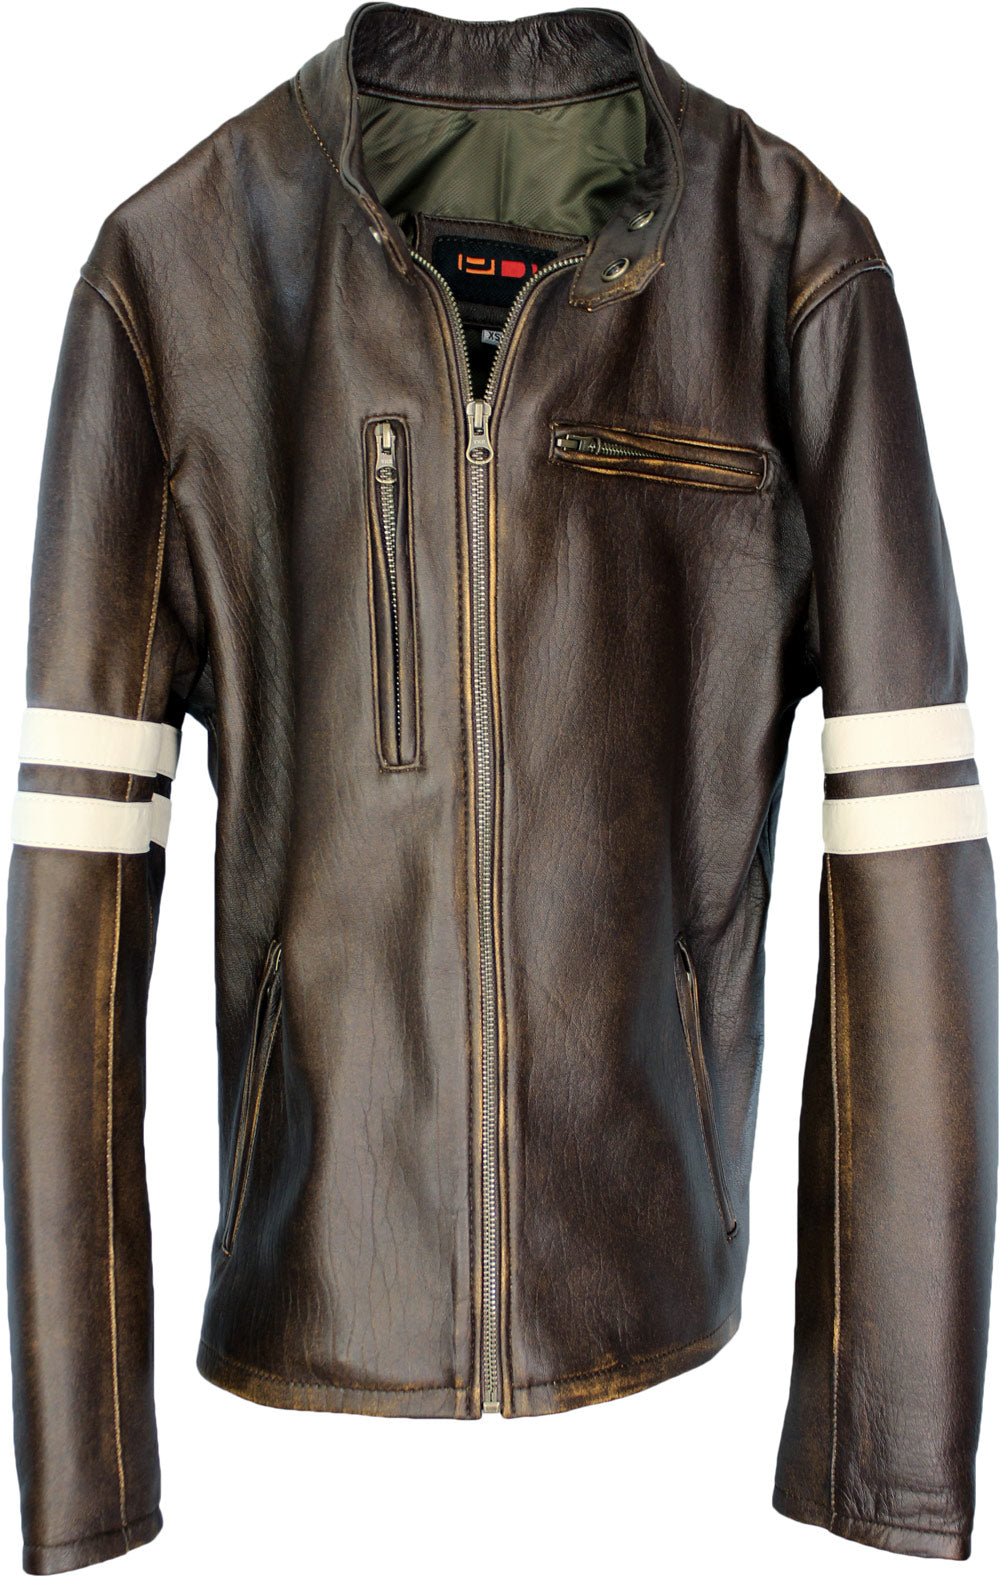 Distressed Shop Leatherwear - Jacket Brown Cafe MUSTANG - Online Stripes– Racer Leather PDCollection